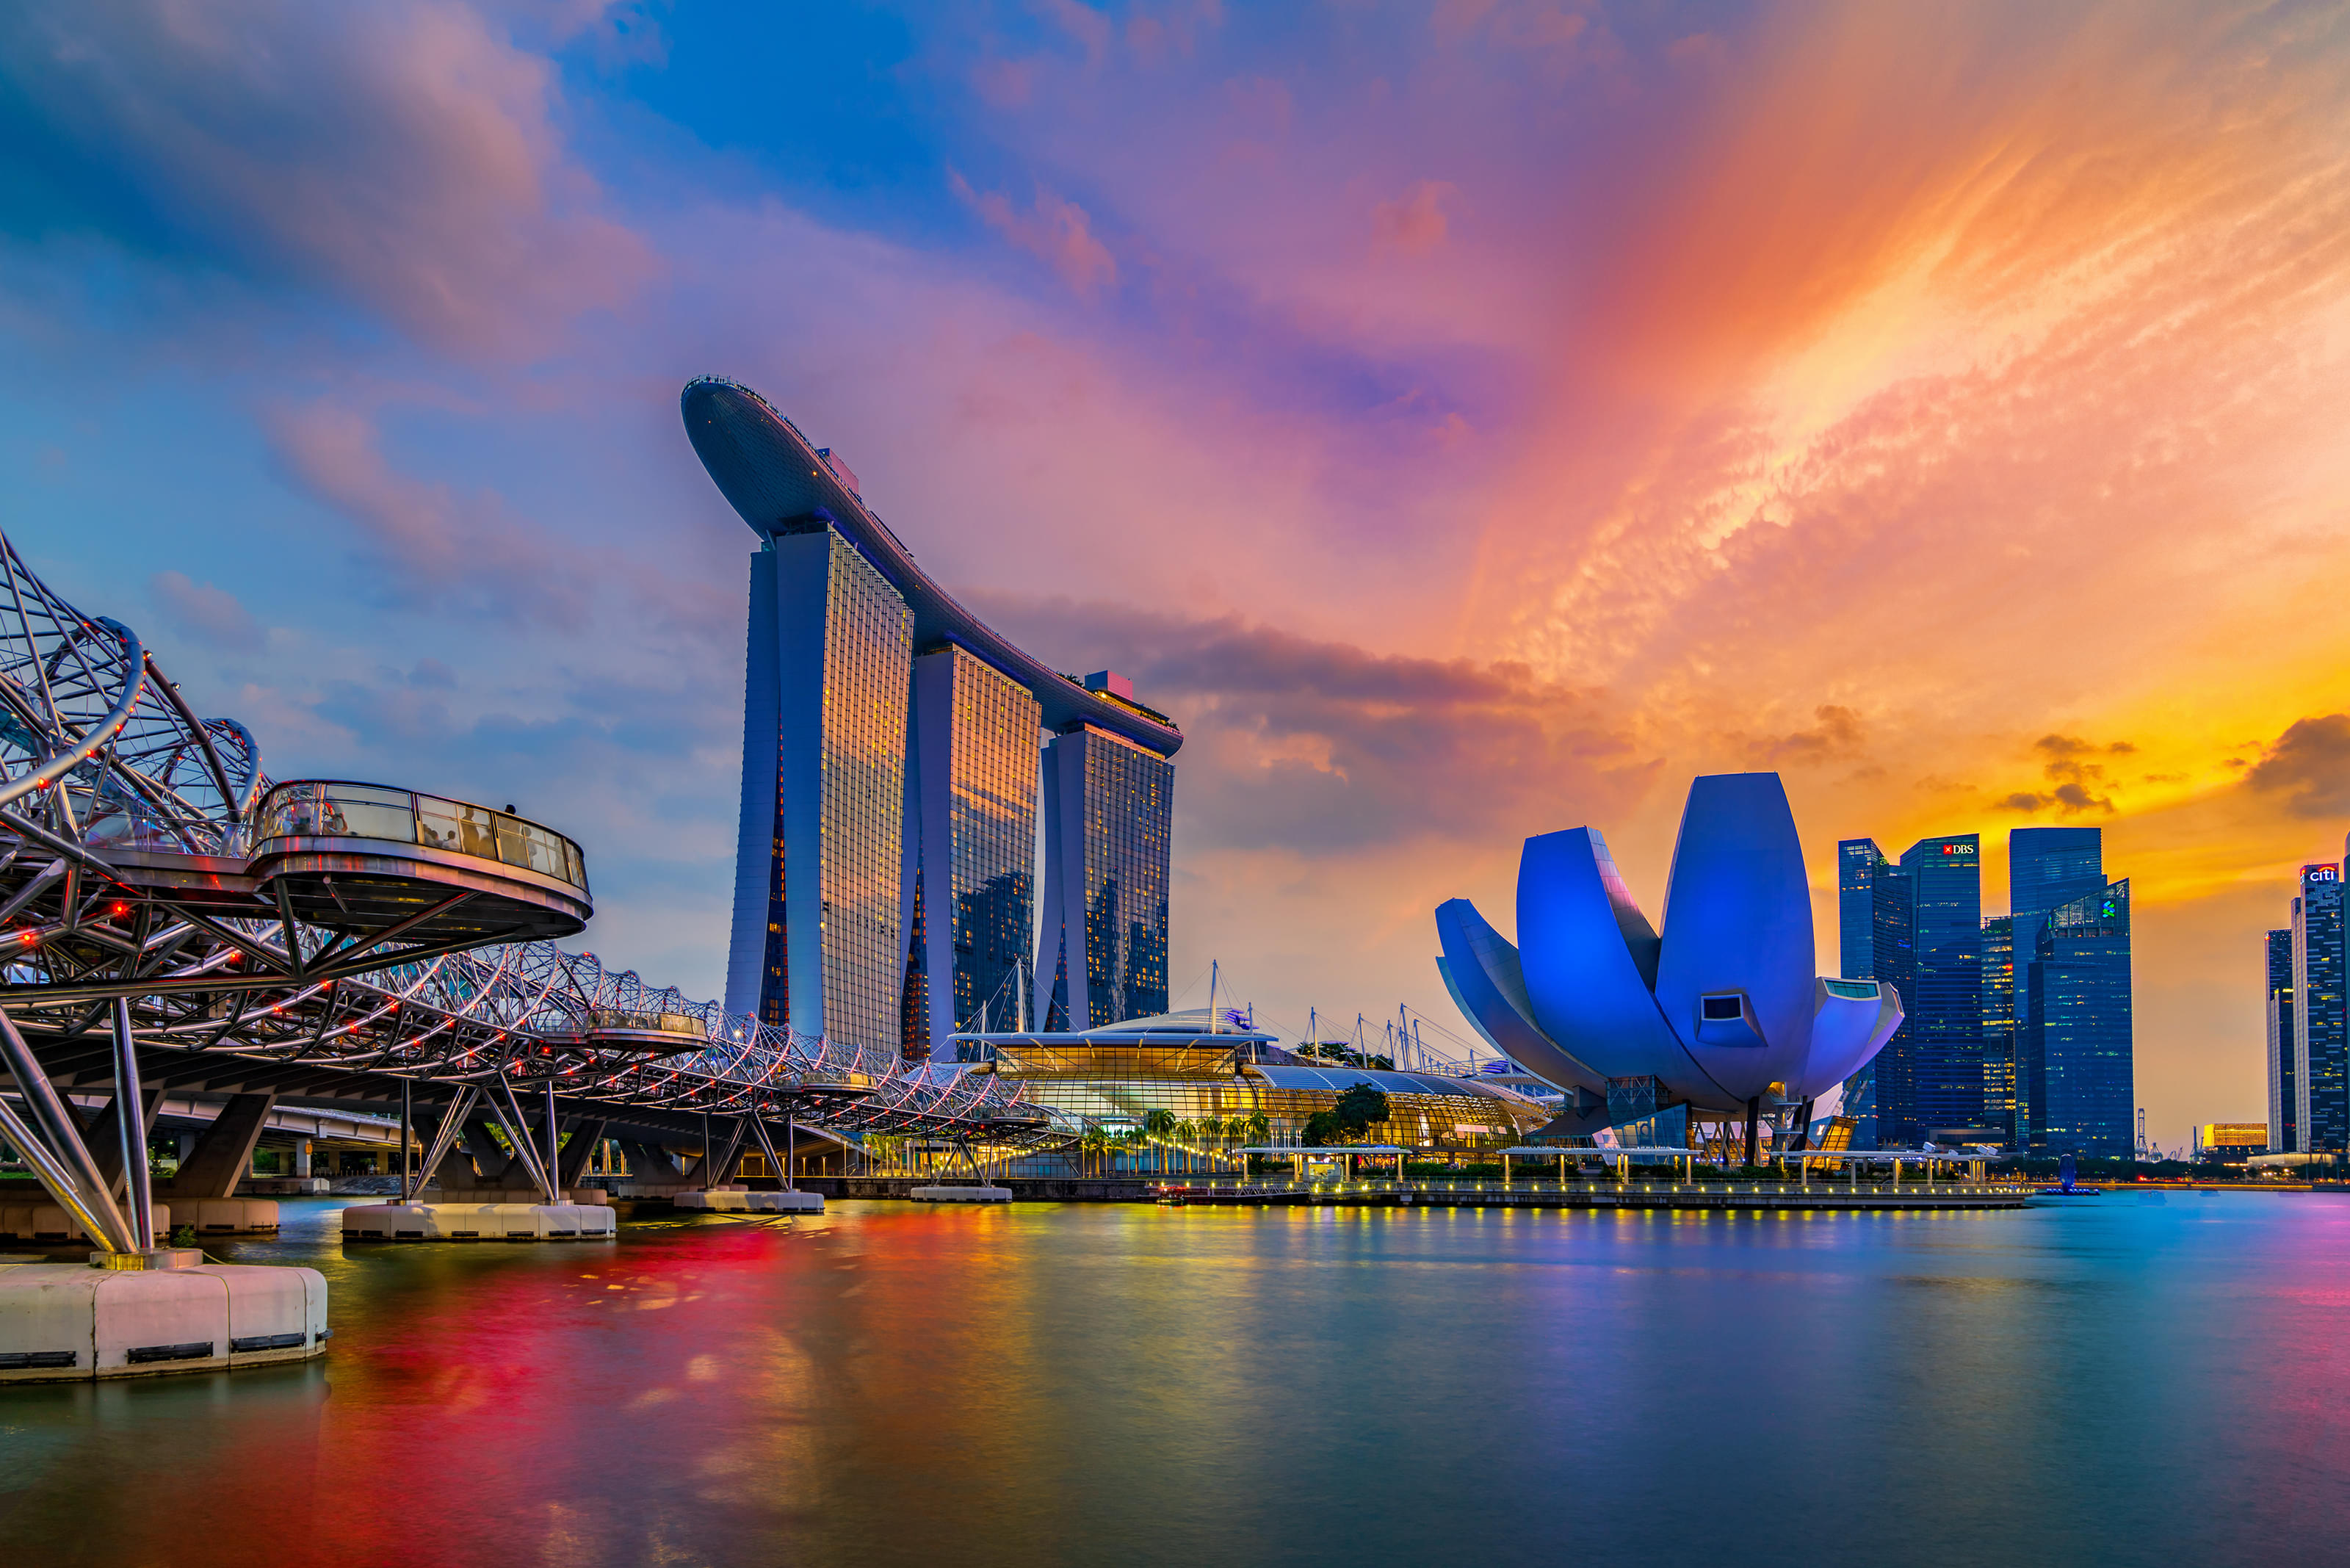 Sunset in Singapore with the backdrop of Marina Bay Sands